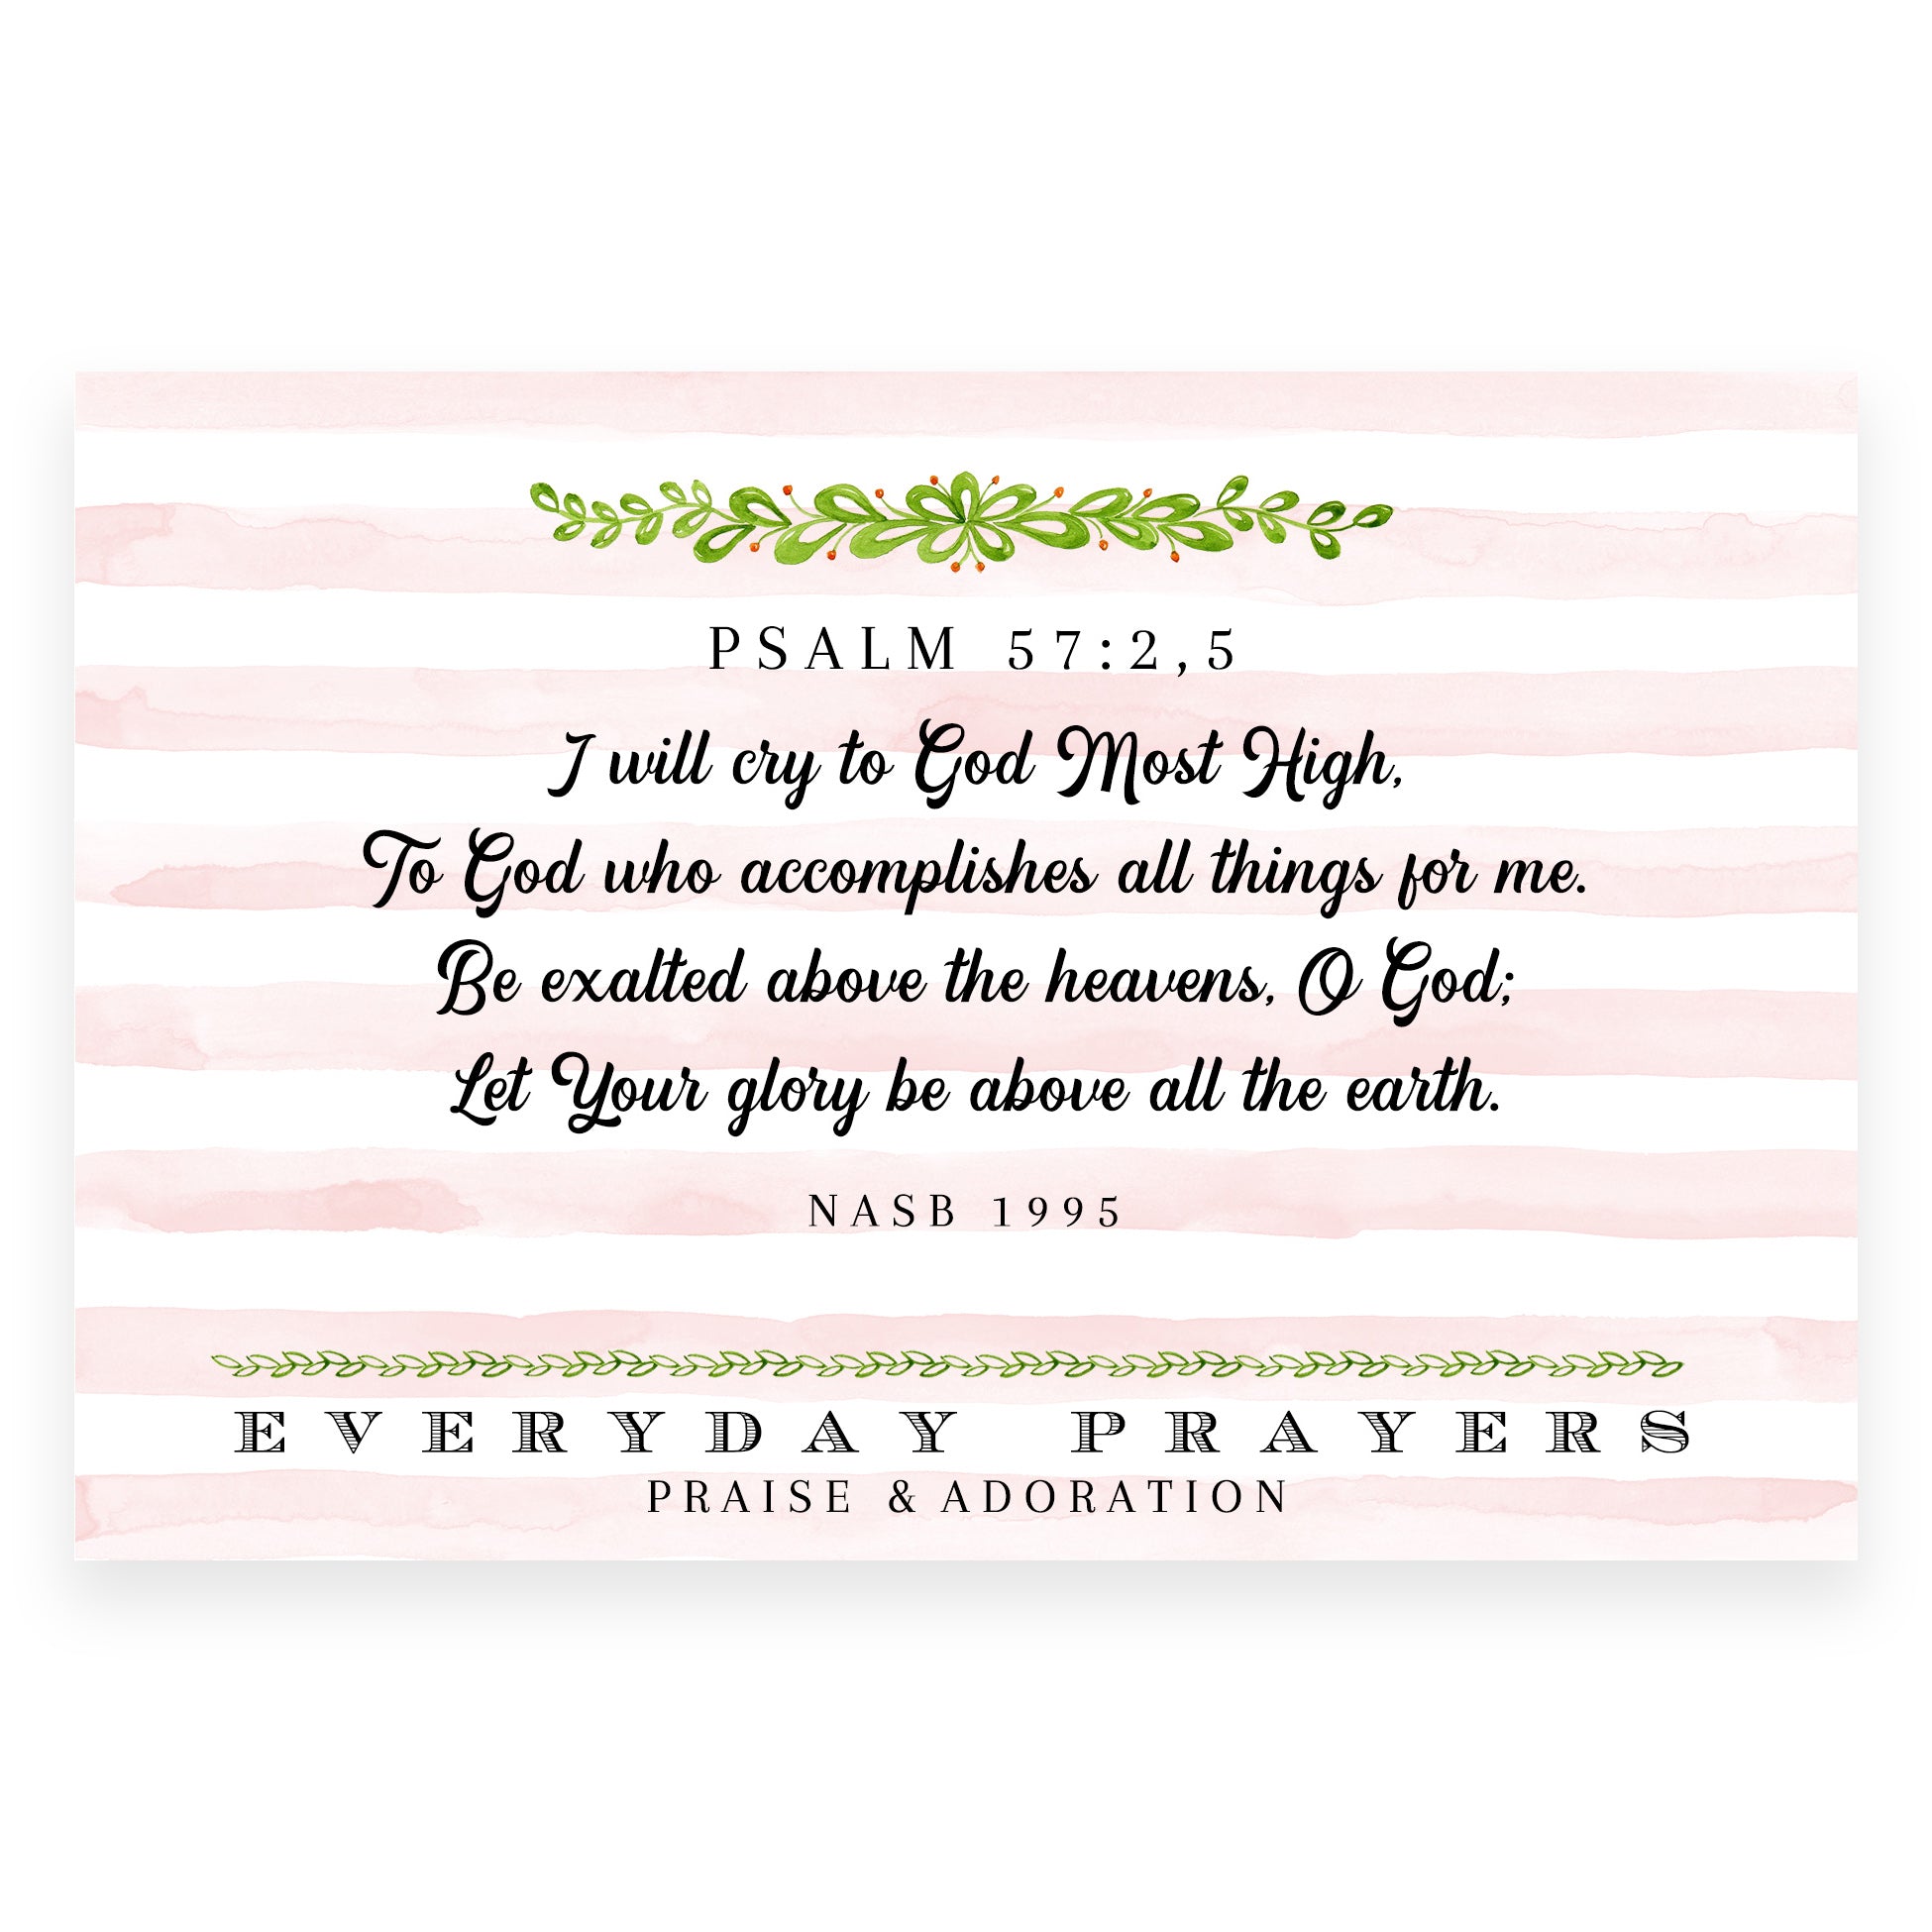 I Will Cry To God Most High (Psalm 57: 2,5) - Everyday Prayer Card